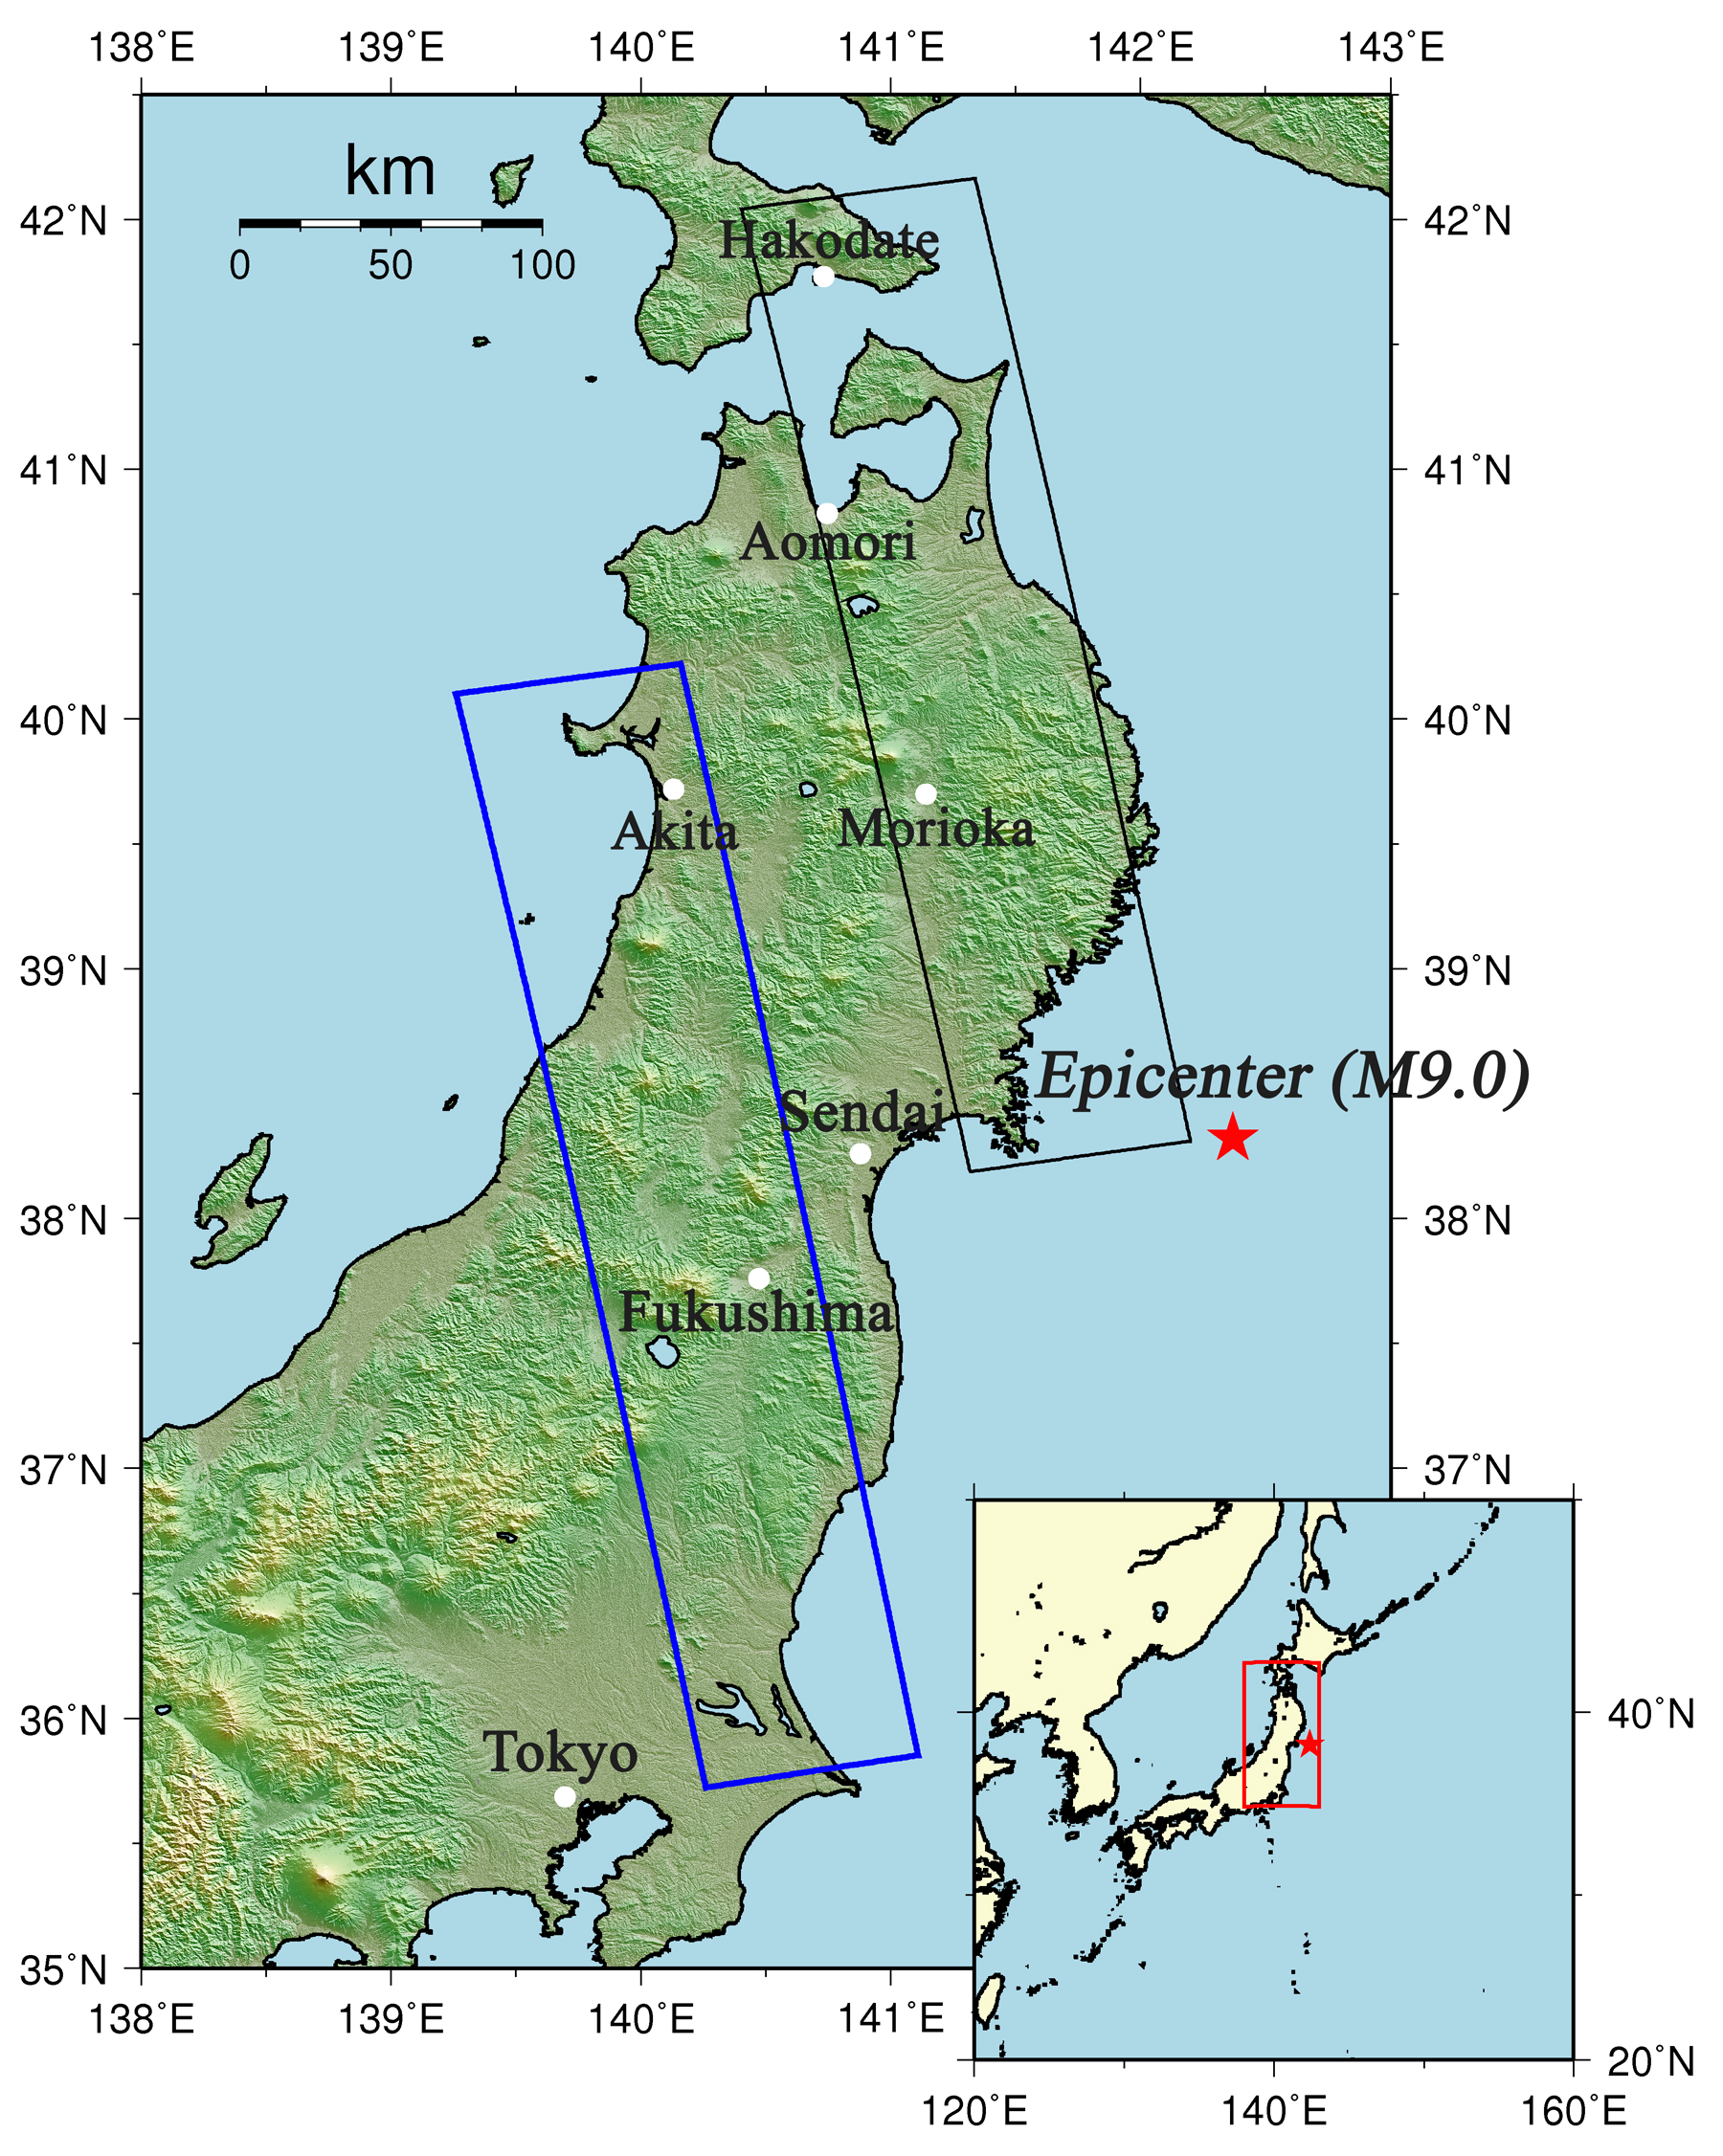 Fig. 1: An overall view of the observation area on March 20, 2011 (We refer to SRTM3 as terrain data). The blue rectangle indicates the observation area shown in Fig. 2, and the black rectangle indicates an area of the previous emergency observation in March 15. The red star represents the epicenter of this earthquake.